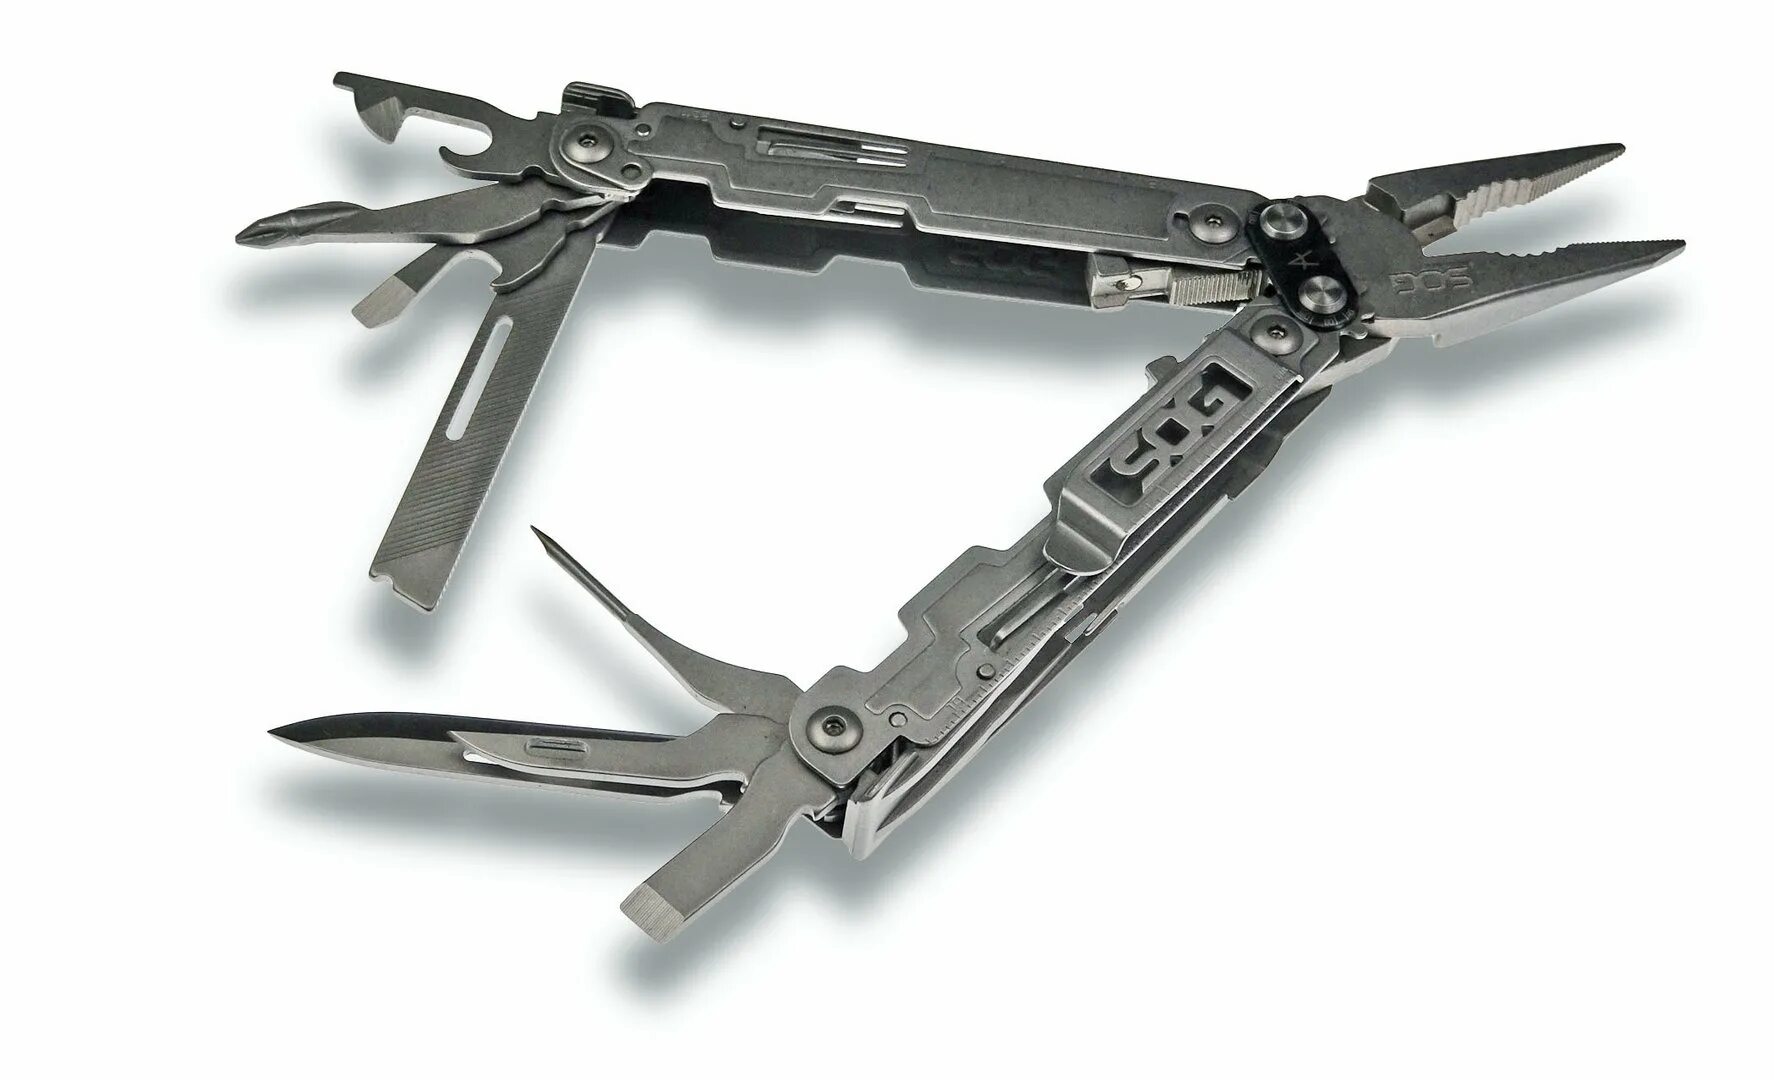 SOG Power access. SOG Multitool Power access. SOG Power access pa1001. Мультитул SOG POWERACCESS pa1001-CP. Access powered